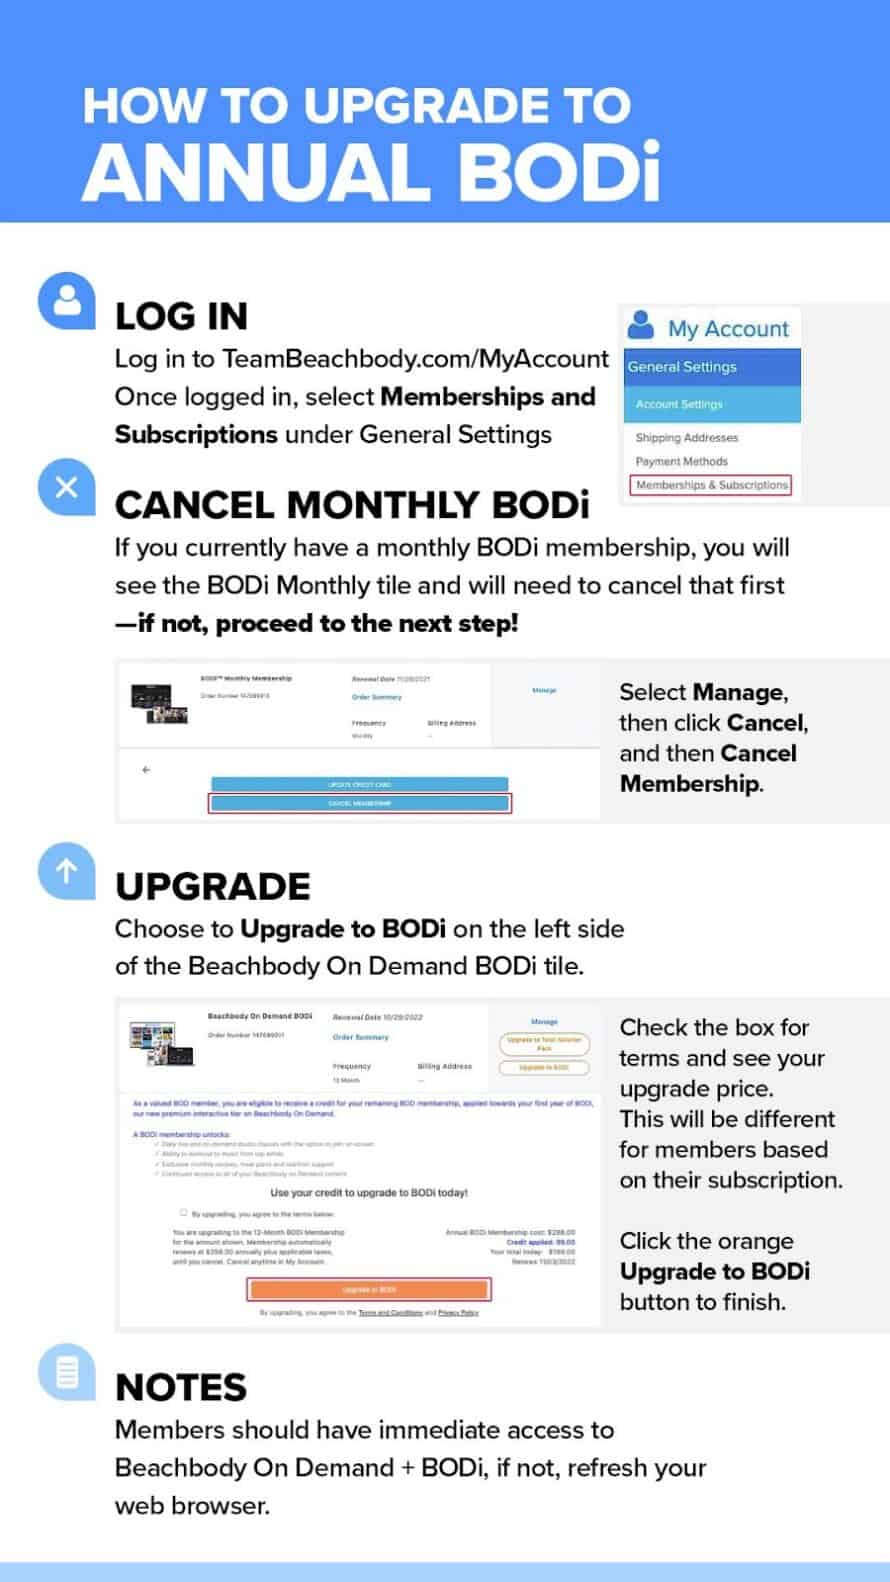 How to Upgrade to BODI infographic